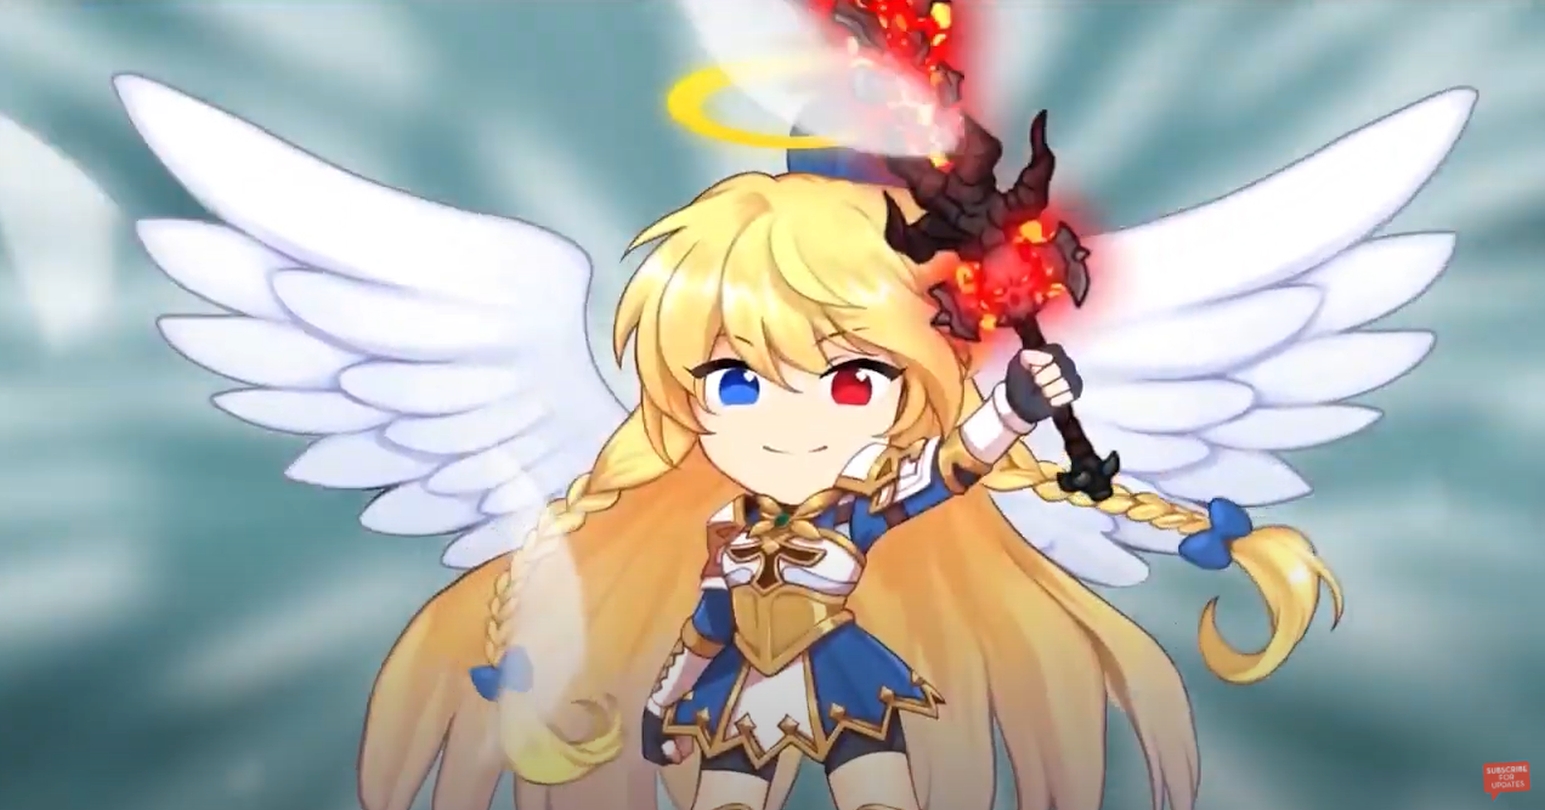 Help A Novice Angel Become Stronger In The Mobile Game Raising Archangel